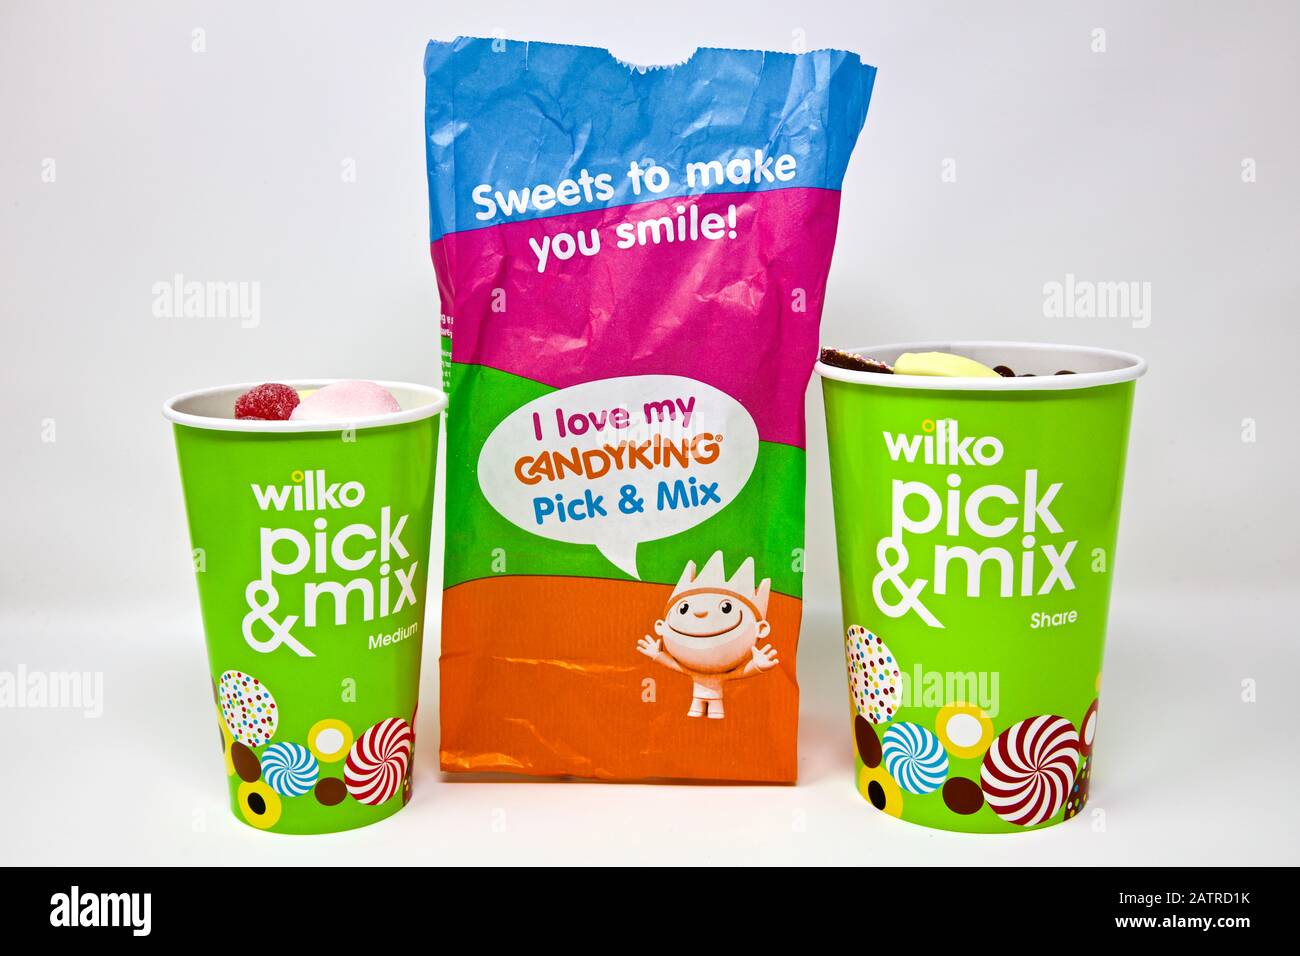 Wilko - pick and mix of Candy King Favourites Stock Photo